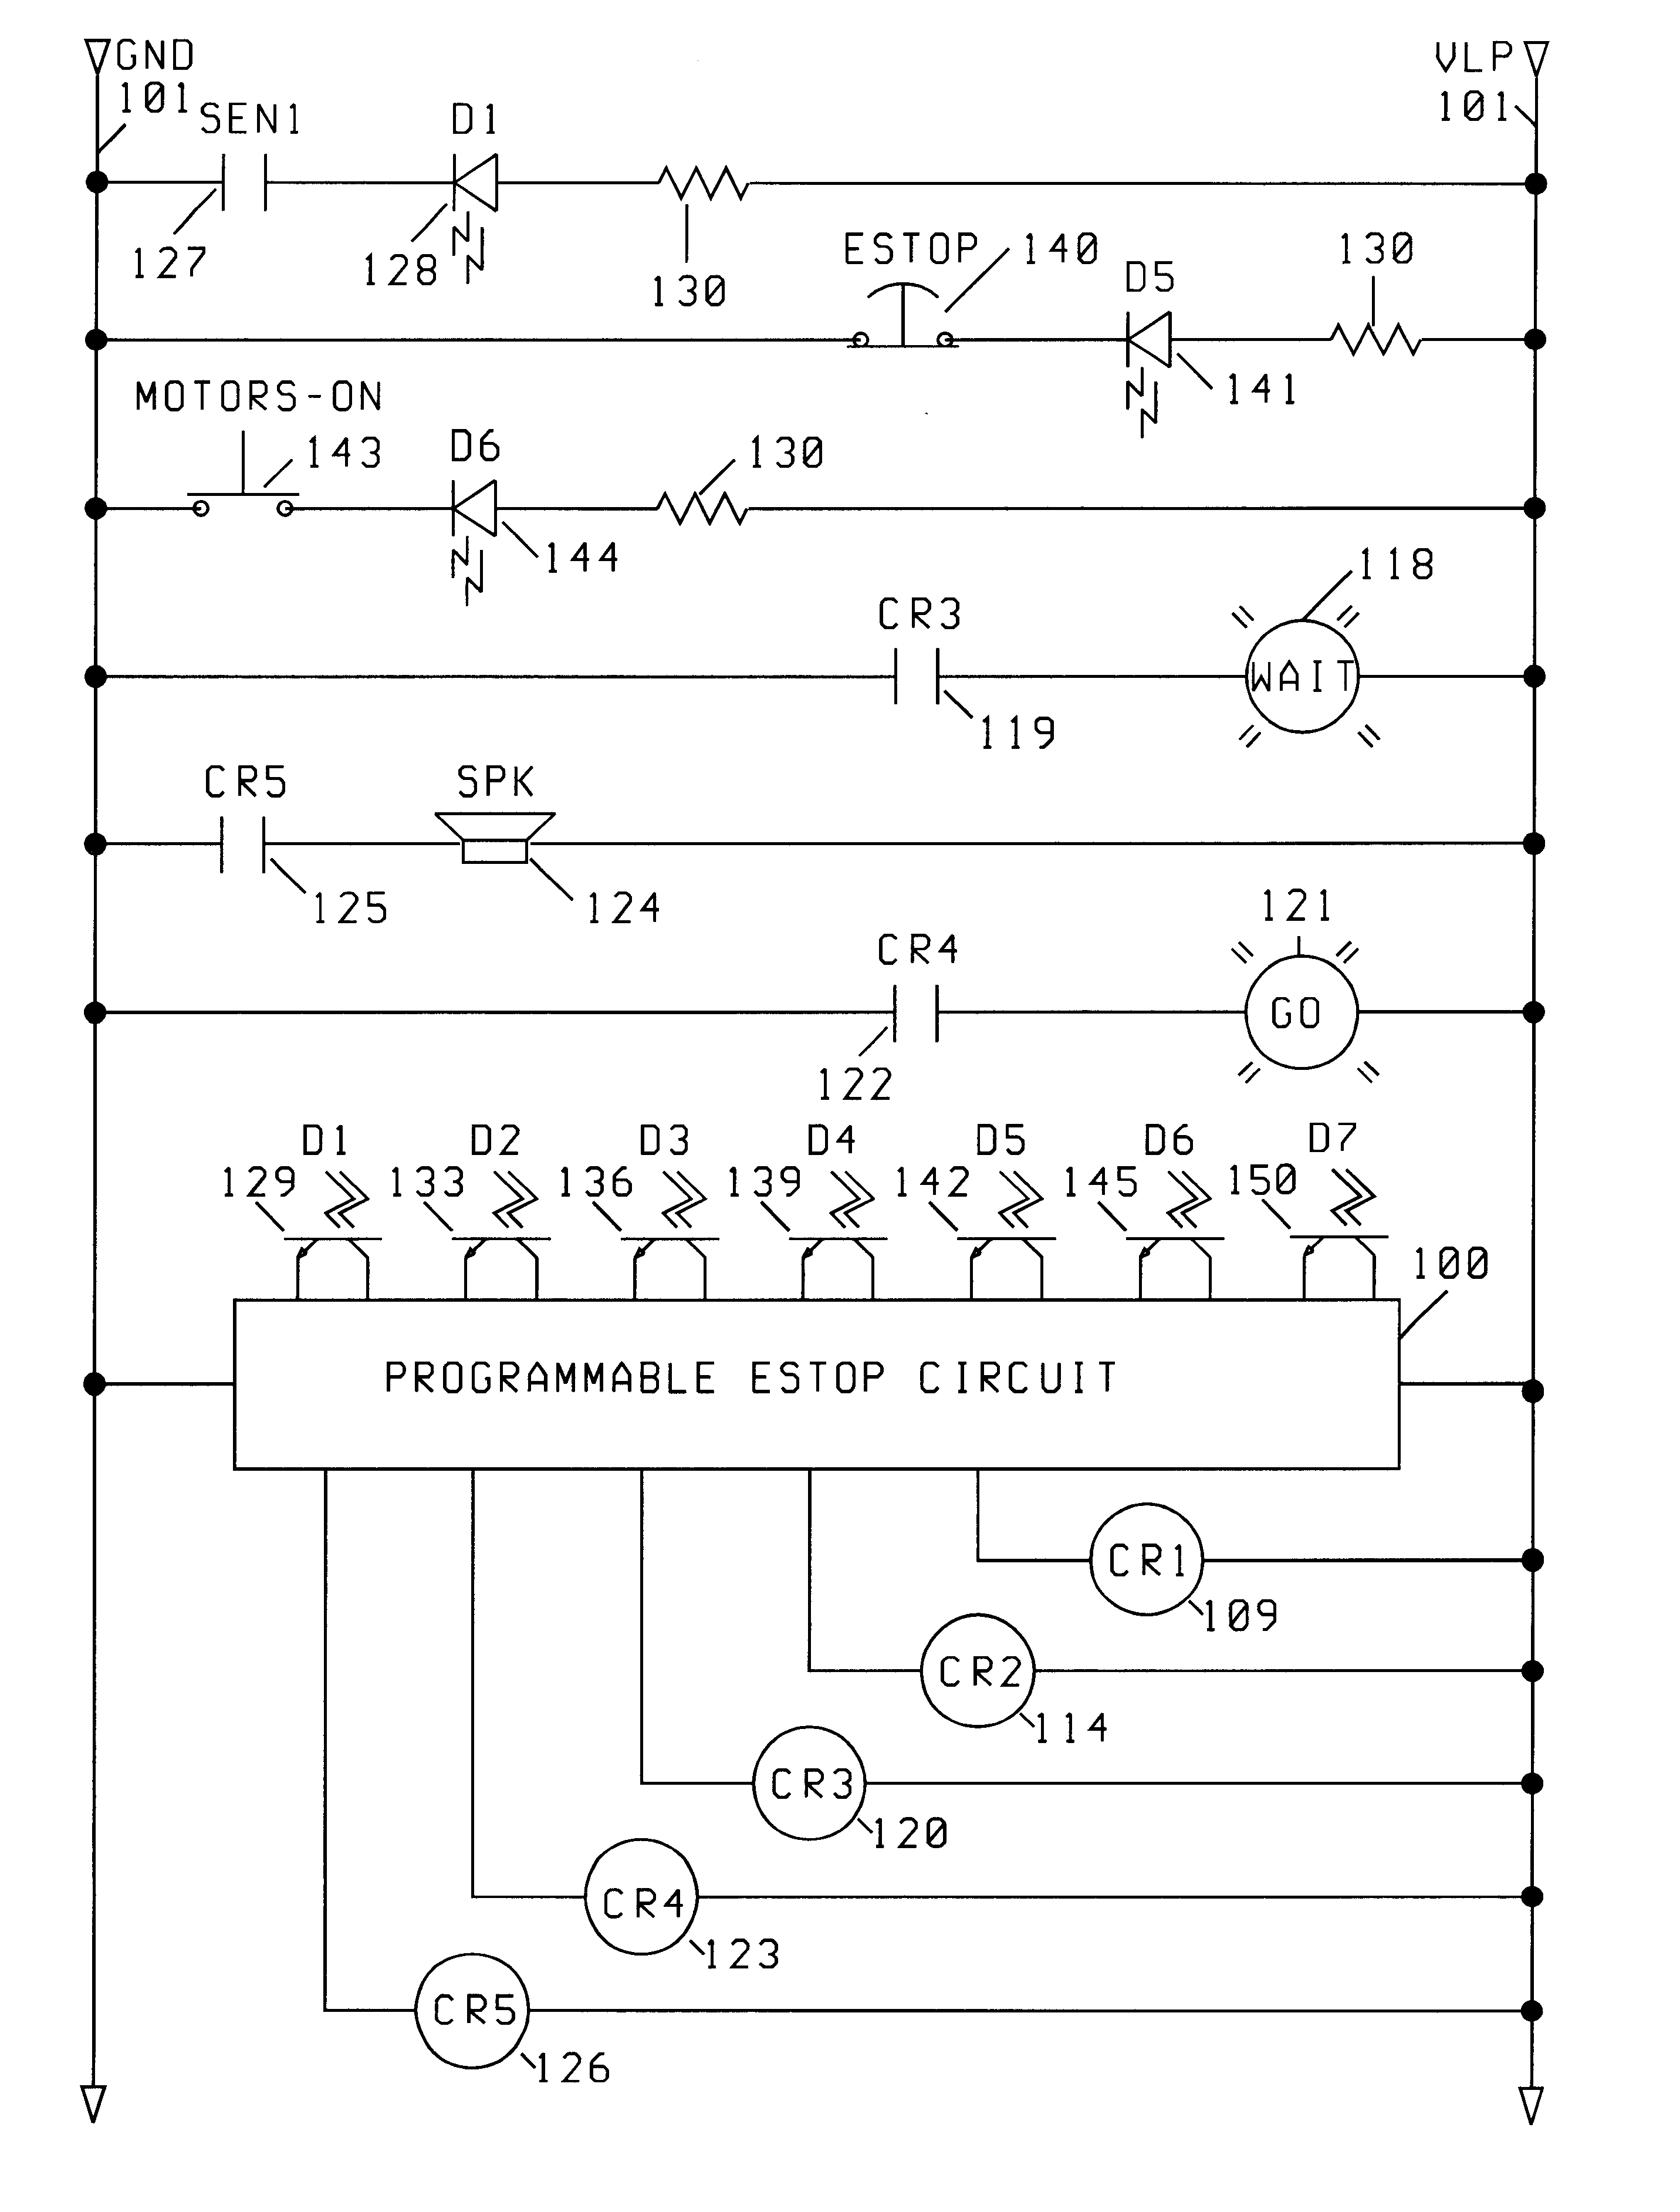 Programmable emergency-stop circuit with testing